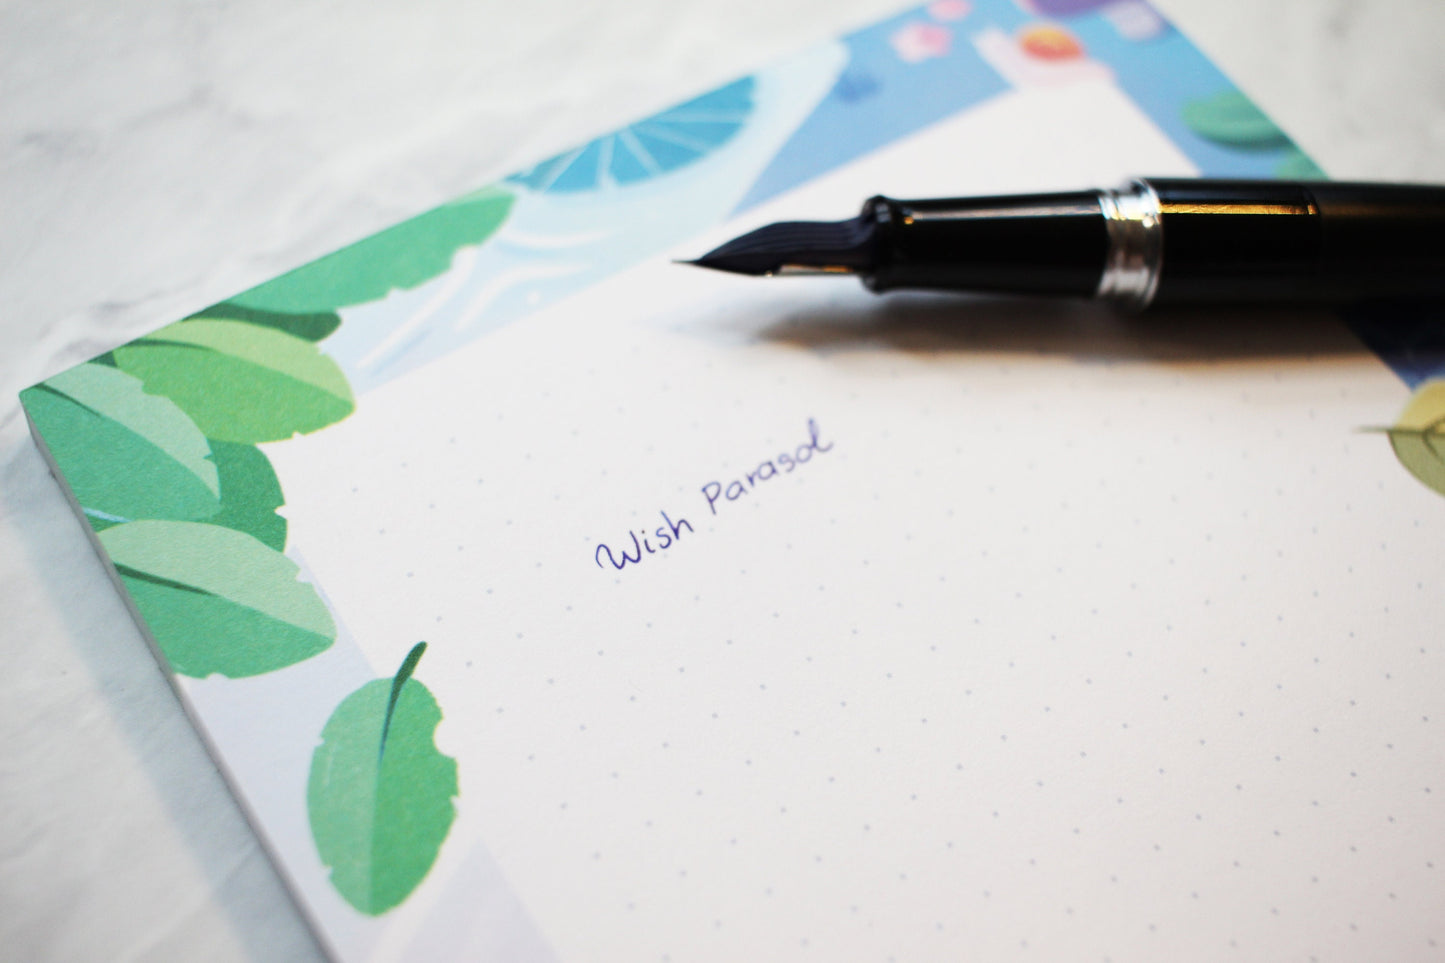 Wish Parasol Notepads (Dotted Grid Paper + Print)